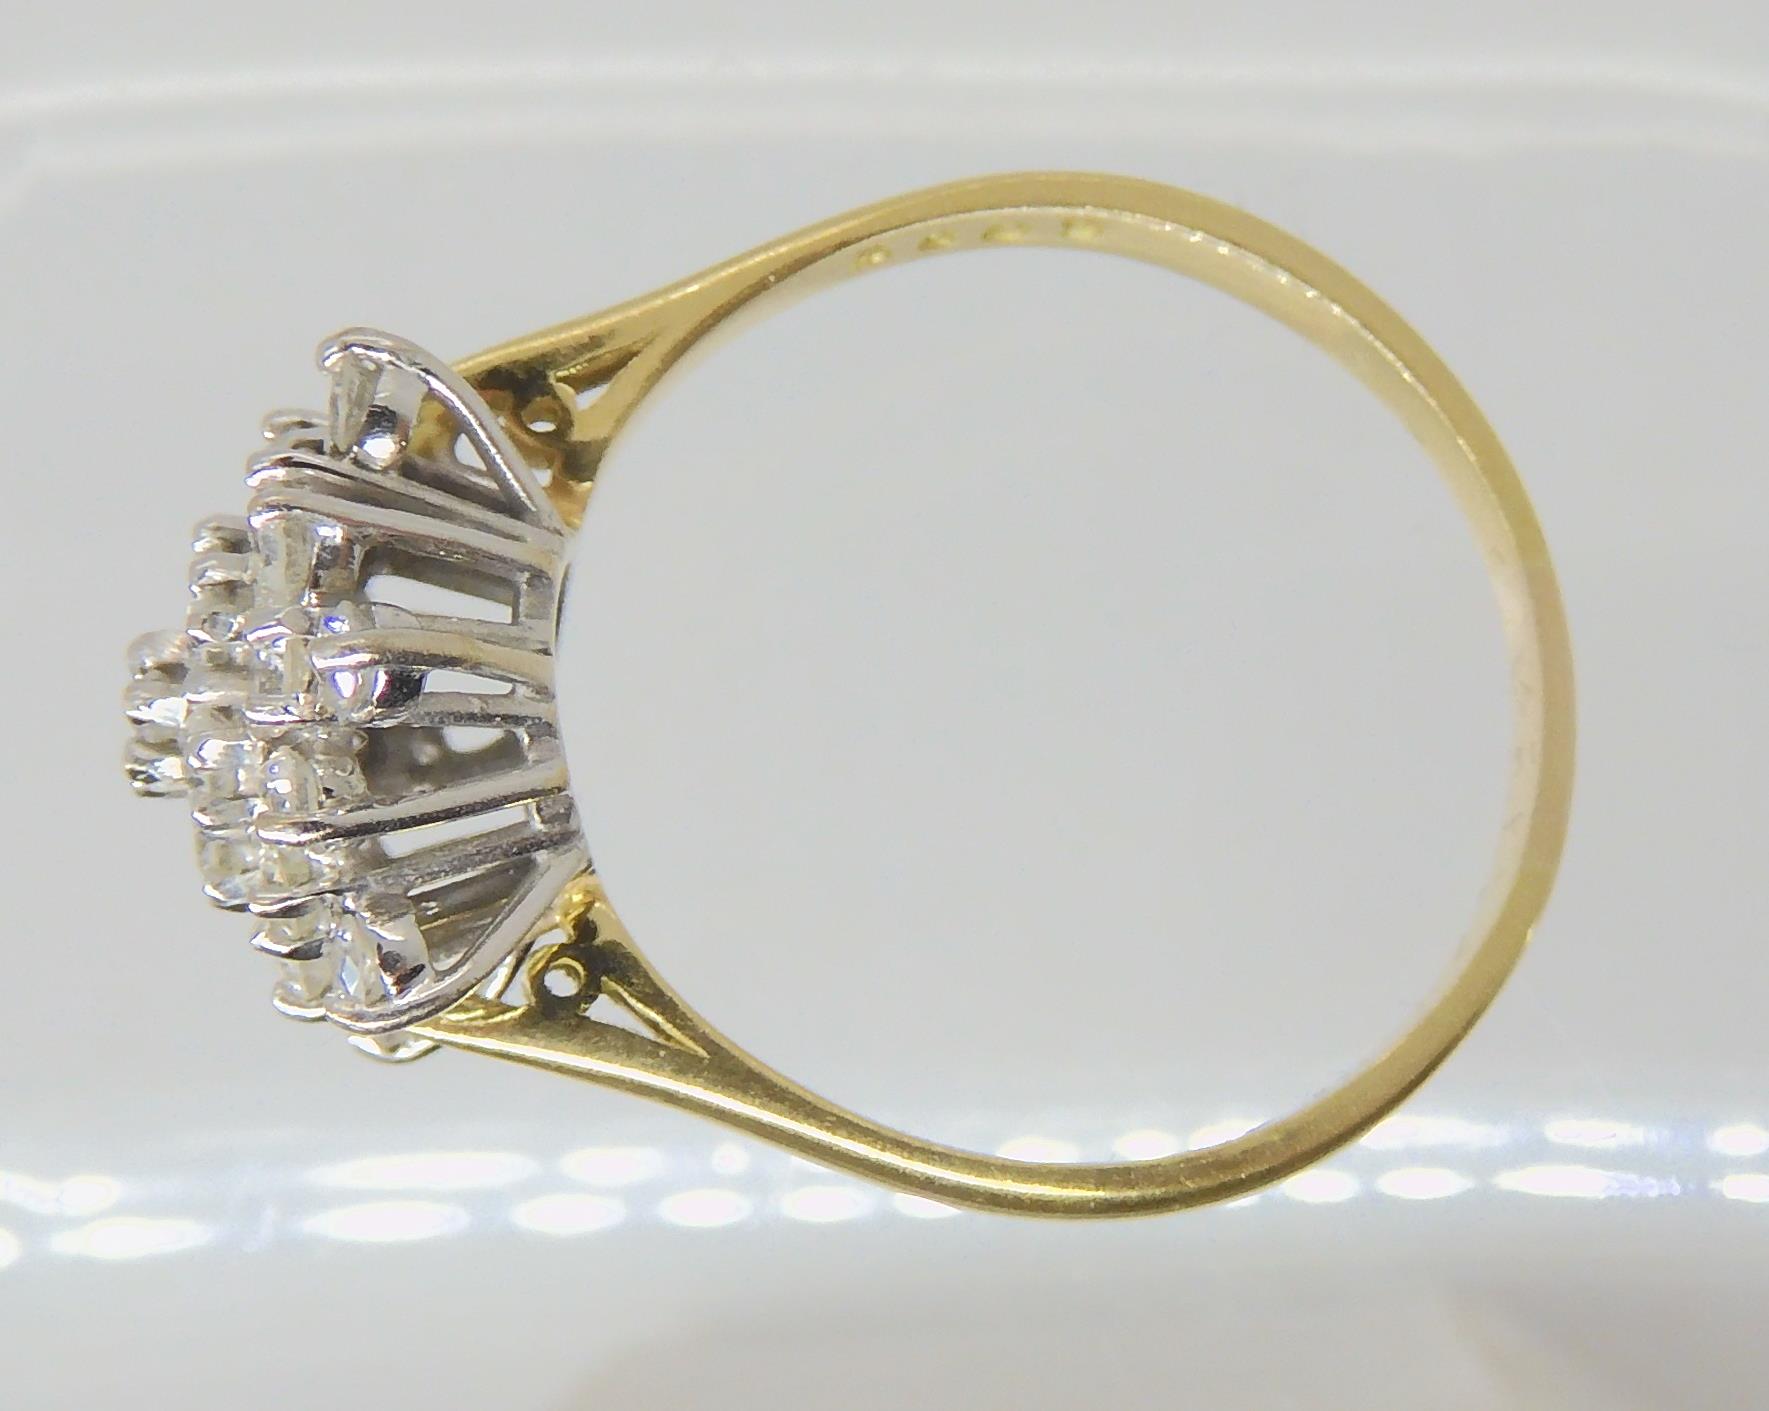 A DIAMOND SNOWFLAKE RING mounted throughout in 18ct yellow and white gold, set with estimated approx - Image 4 of 4